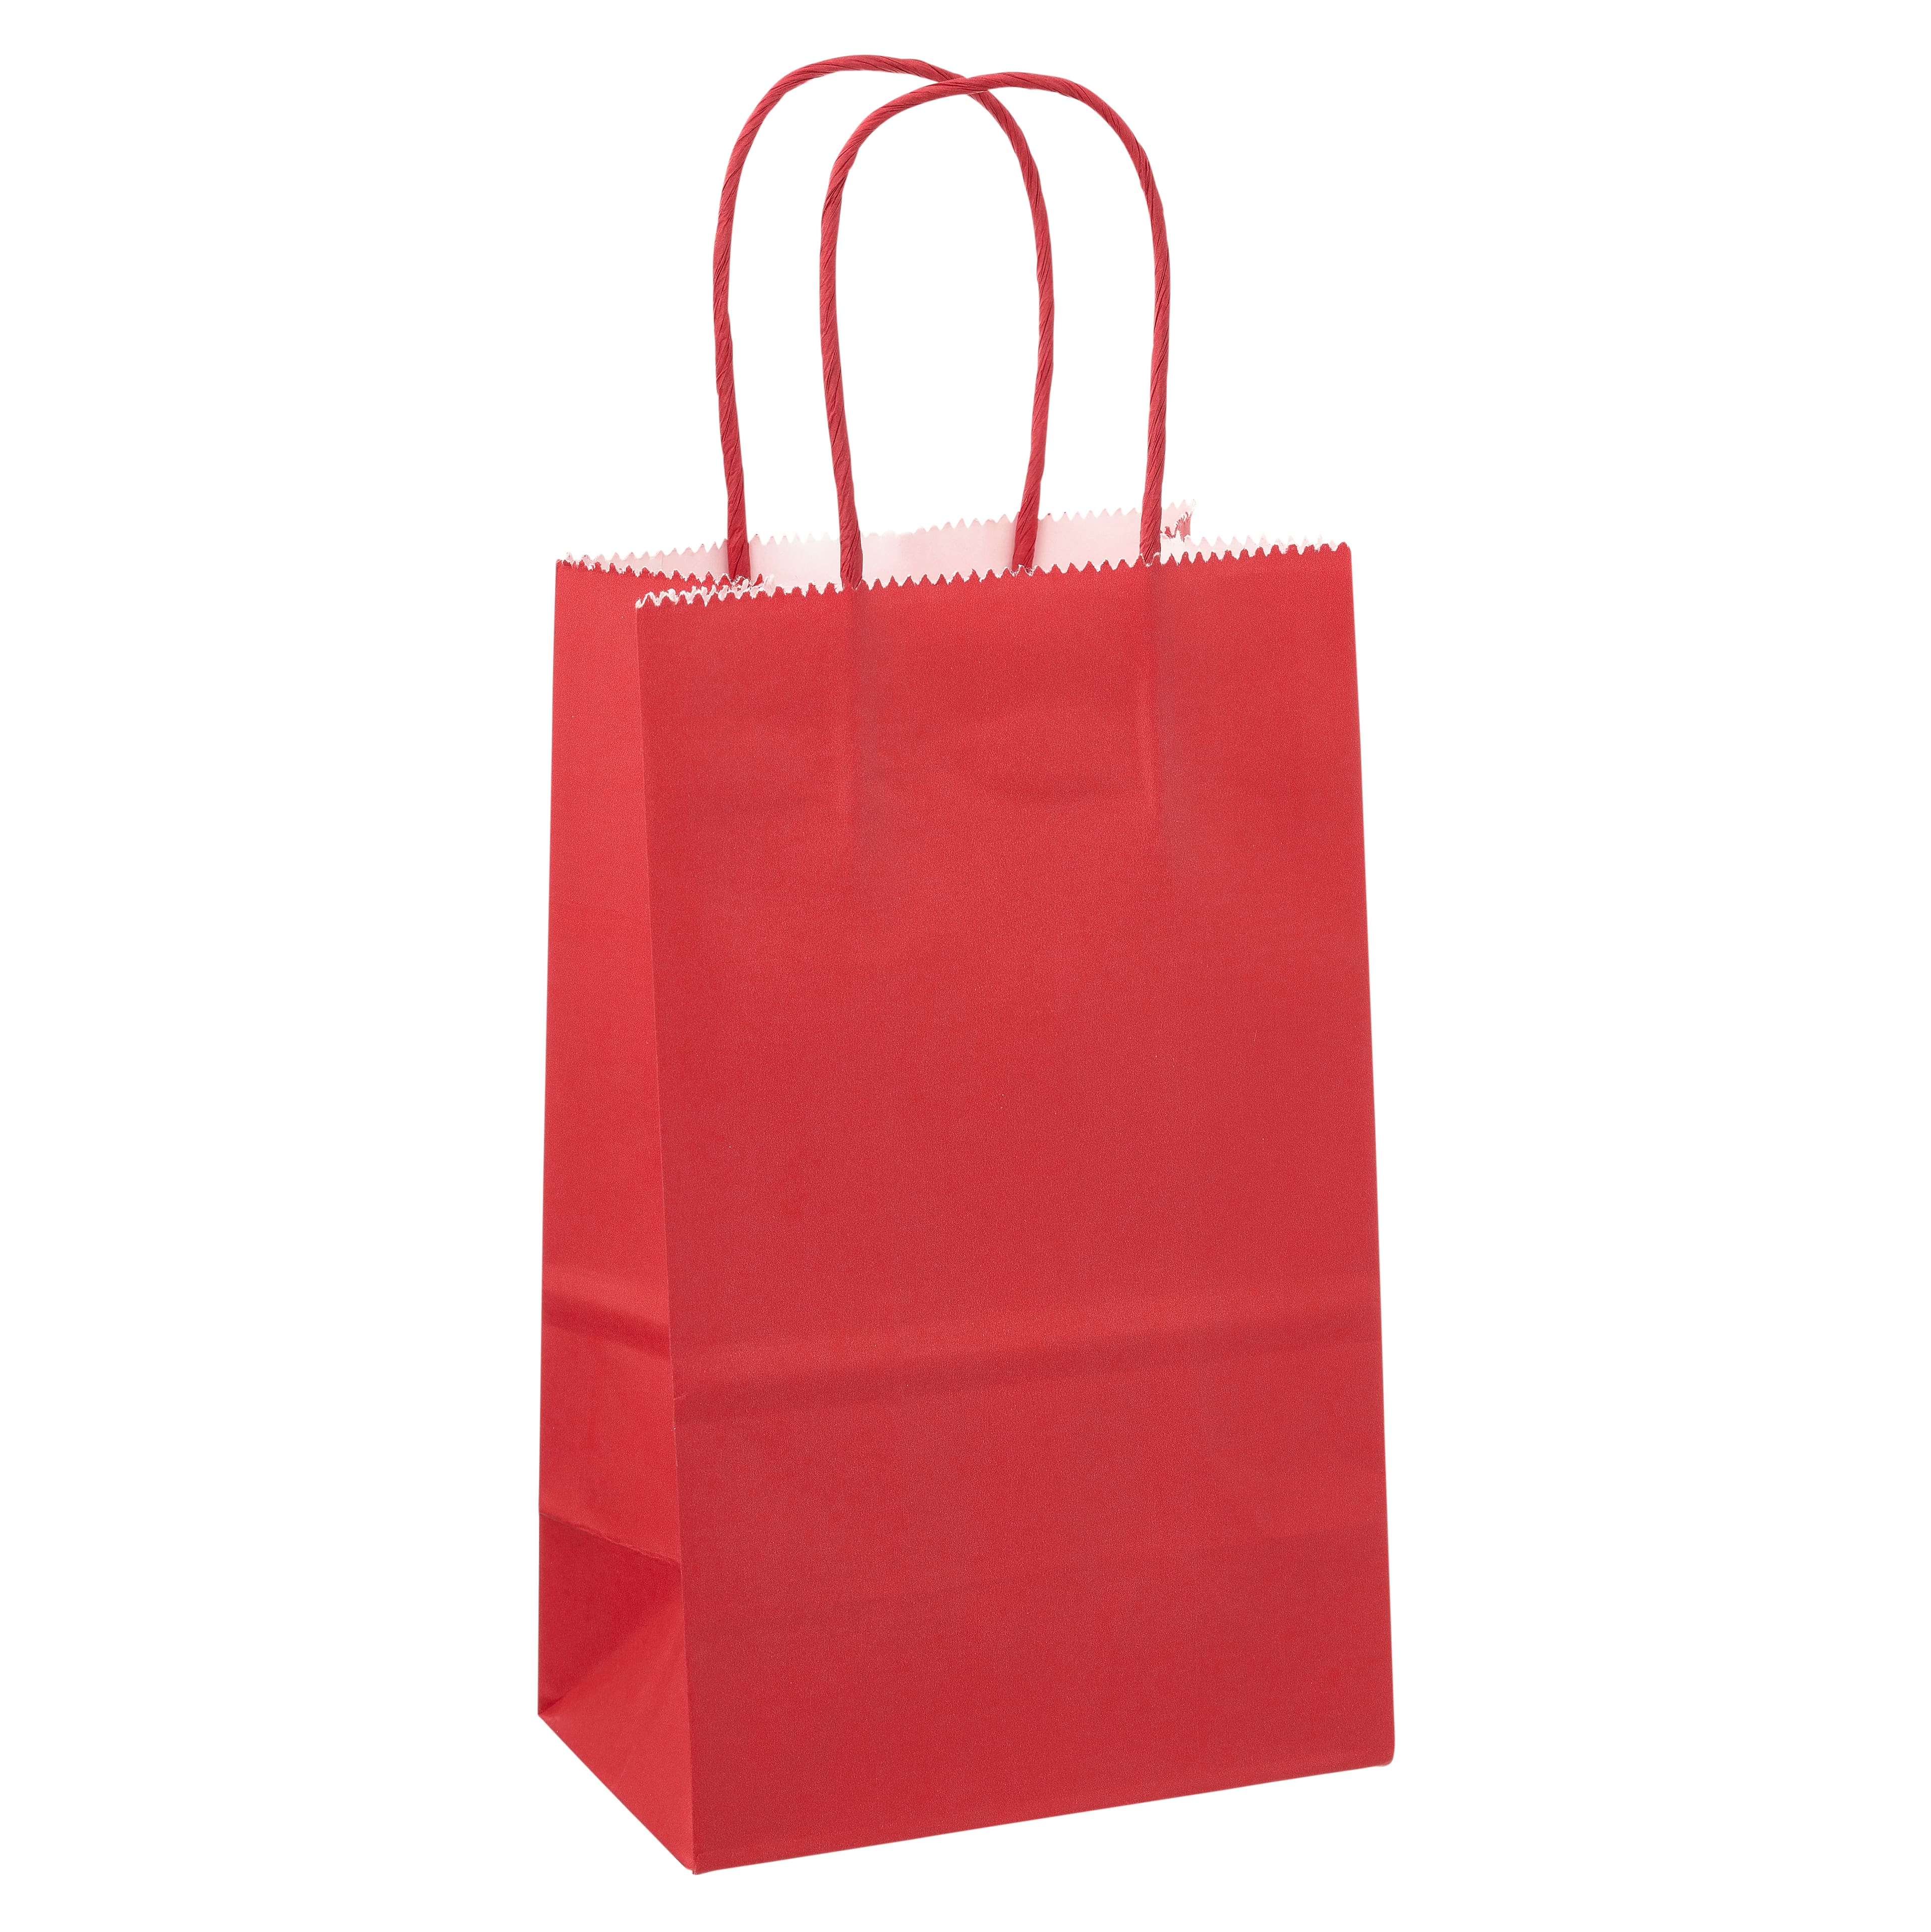 Small, Medium & Large Red Gift Bags & Tissue Paper Kit - 36 Pc